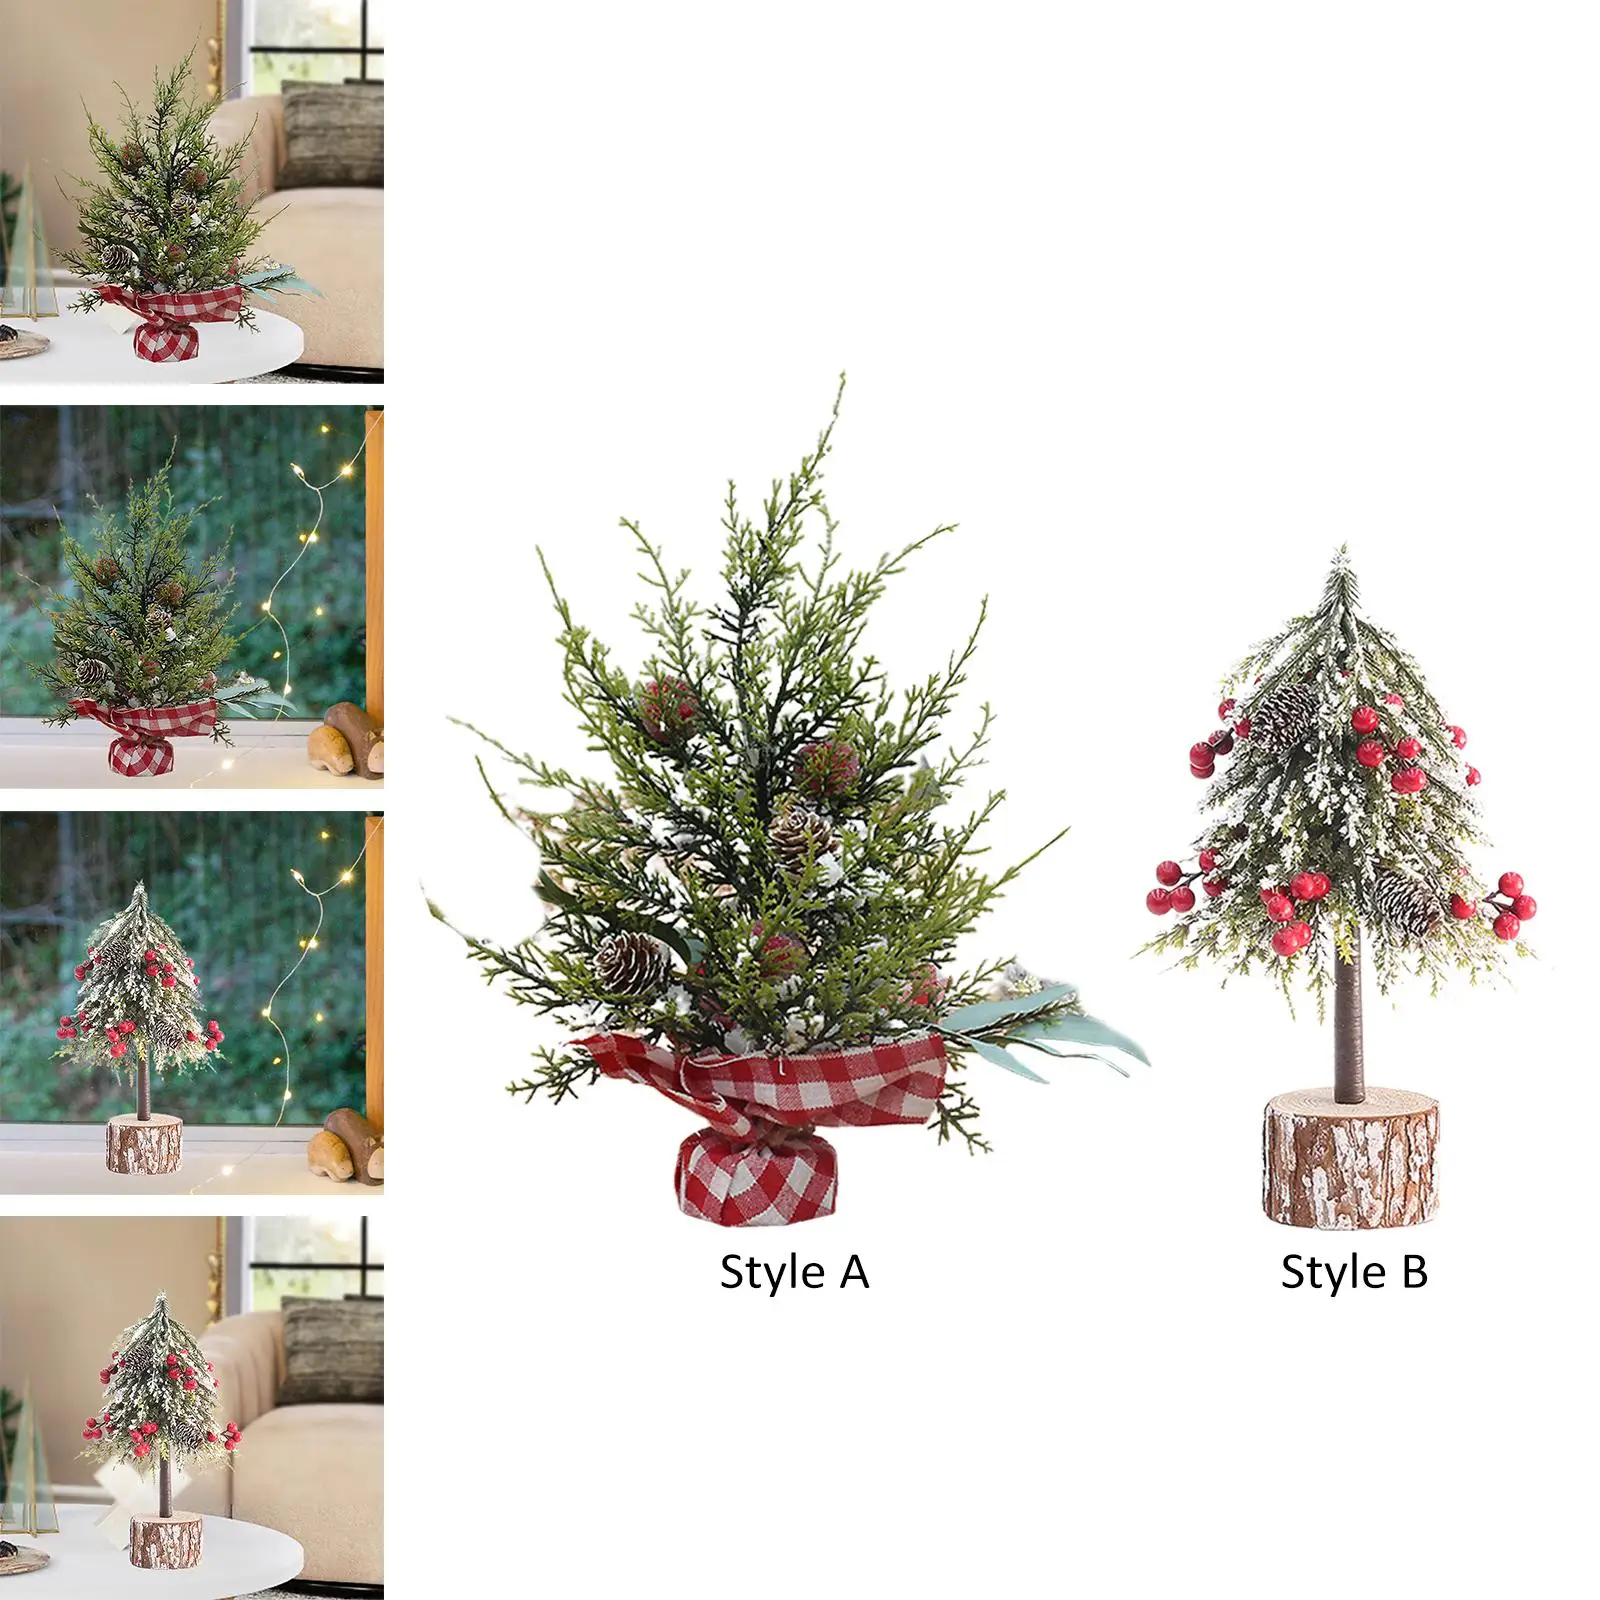 Artificial Mini Christmas Tree Realistic Decorative Home Decor Christmas Ornament for Shelf Office Holiday Fireplace Party